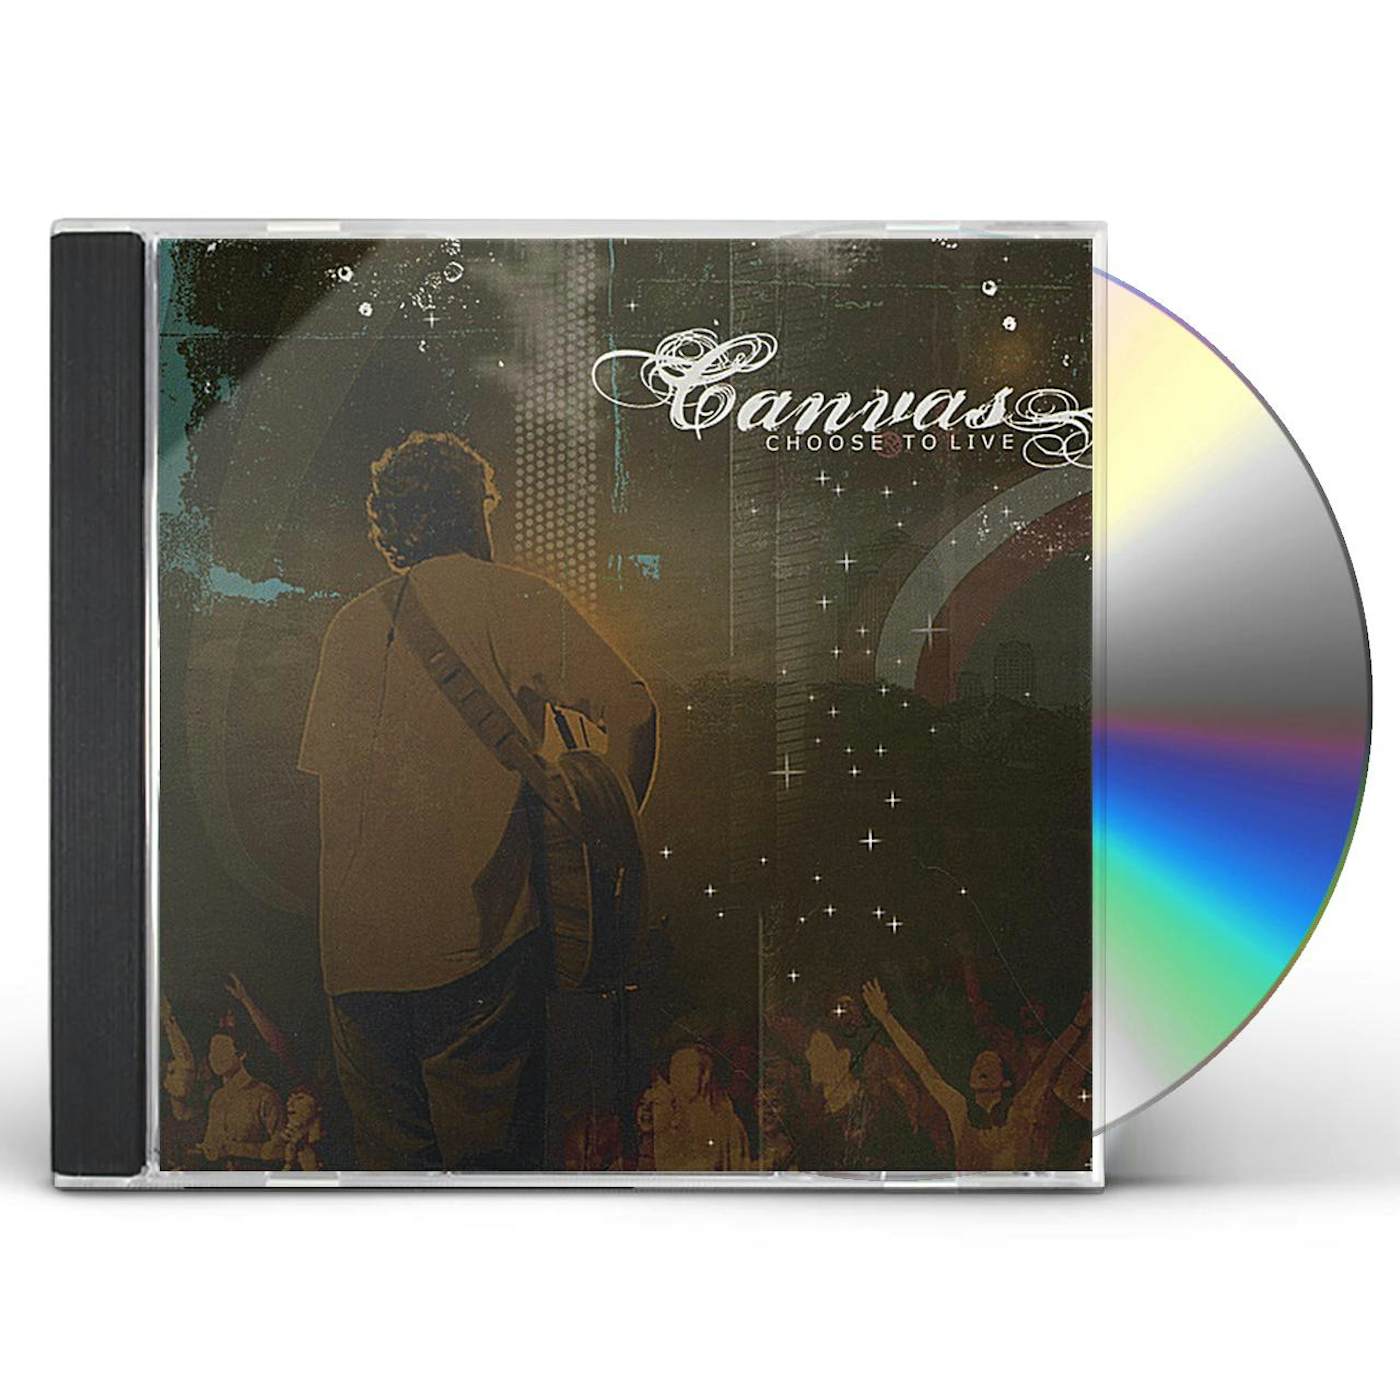 CANVAS CHOOSE TO LIVE CD